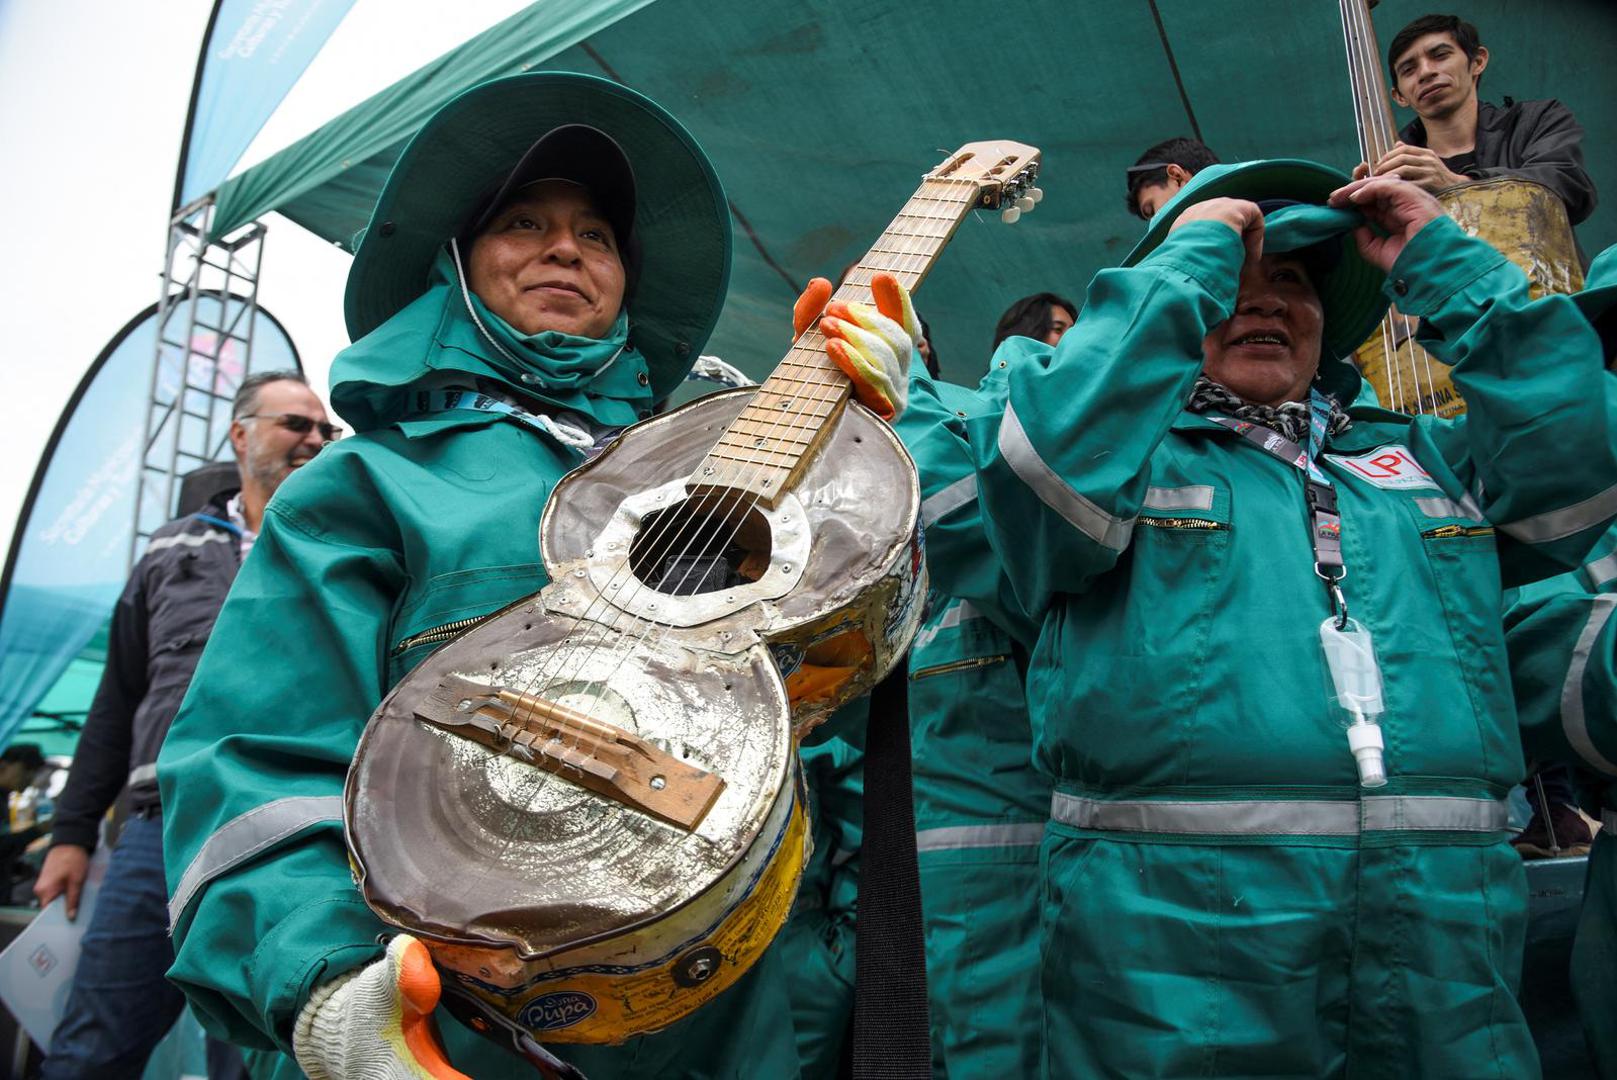 Women waste pickers from the city of La Paz pose near the musicians of the Paraguayan Cateura Recycled Instruments Orchestra, at the Sak'a Churu landfill in Alpacoma, in La Paz, Bolivia February 27, 2023. REUTERS/Claudia Morales Photo: CLAUDIA MORALES/REUTERS